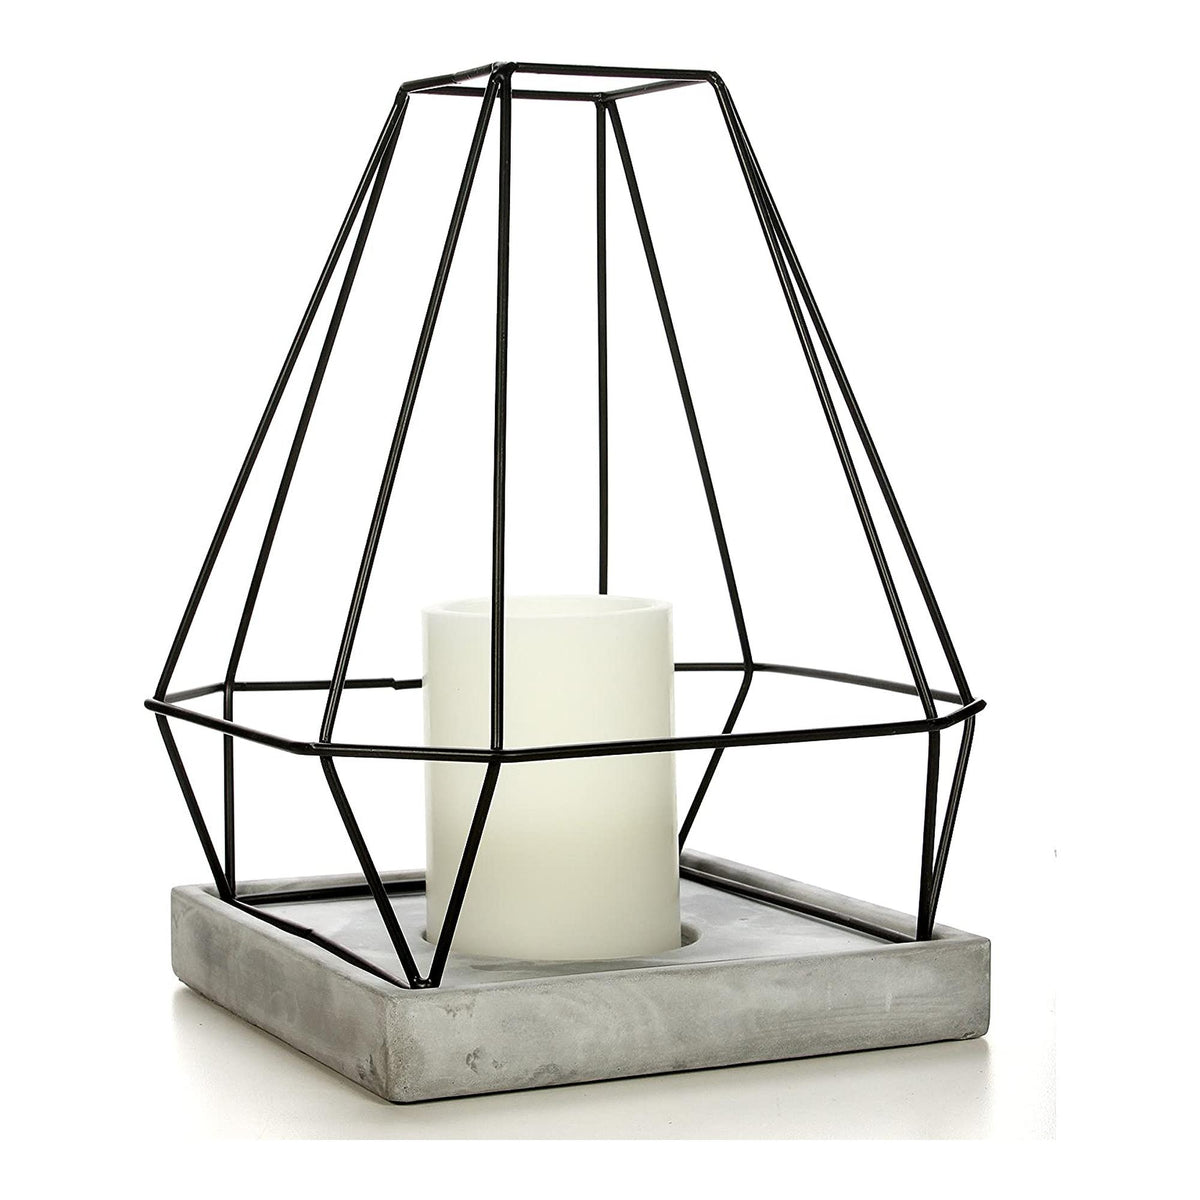 HOSLEY®  Iron  Lantern with Cement Tray, 11 inches High